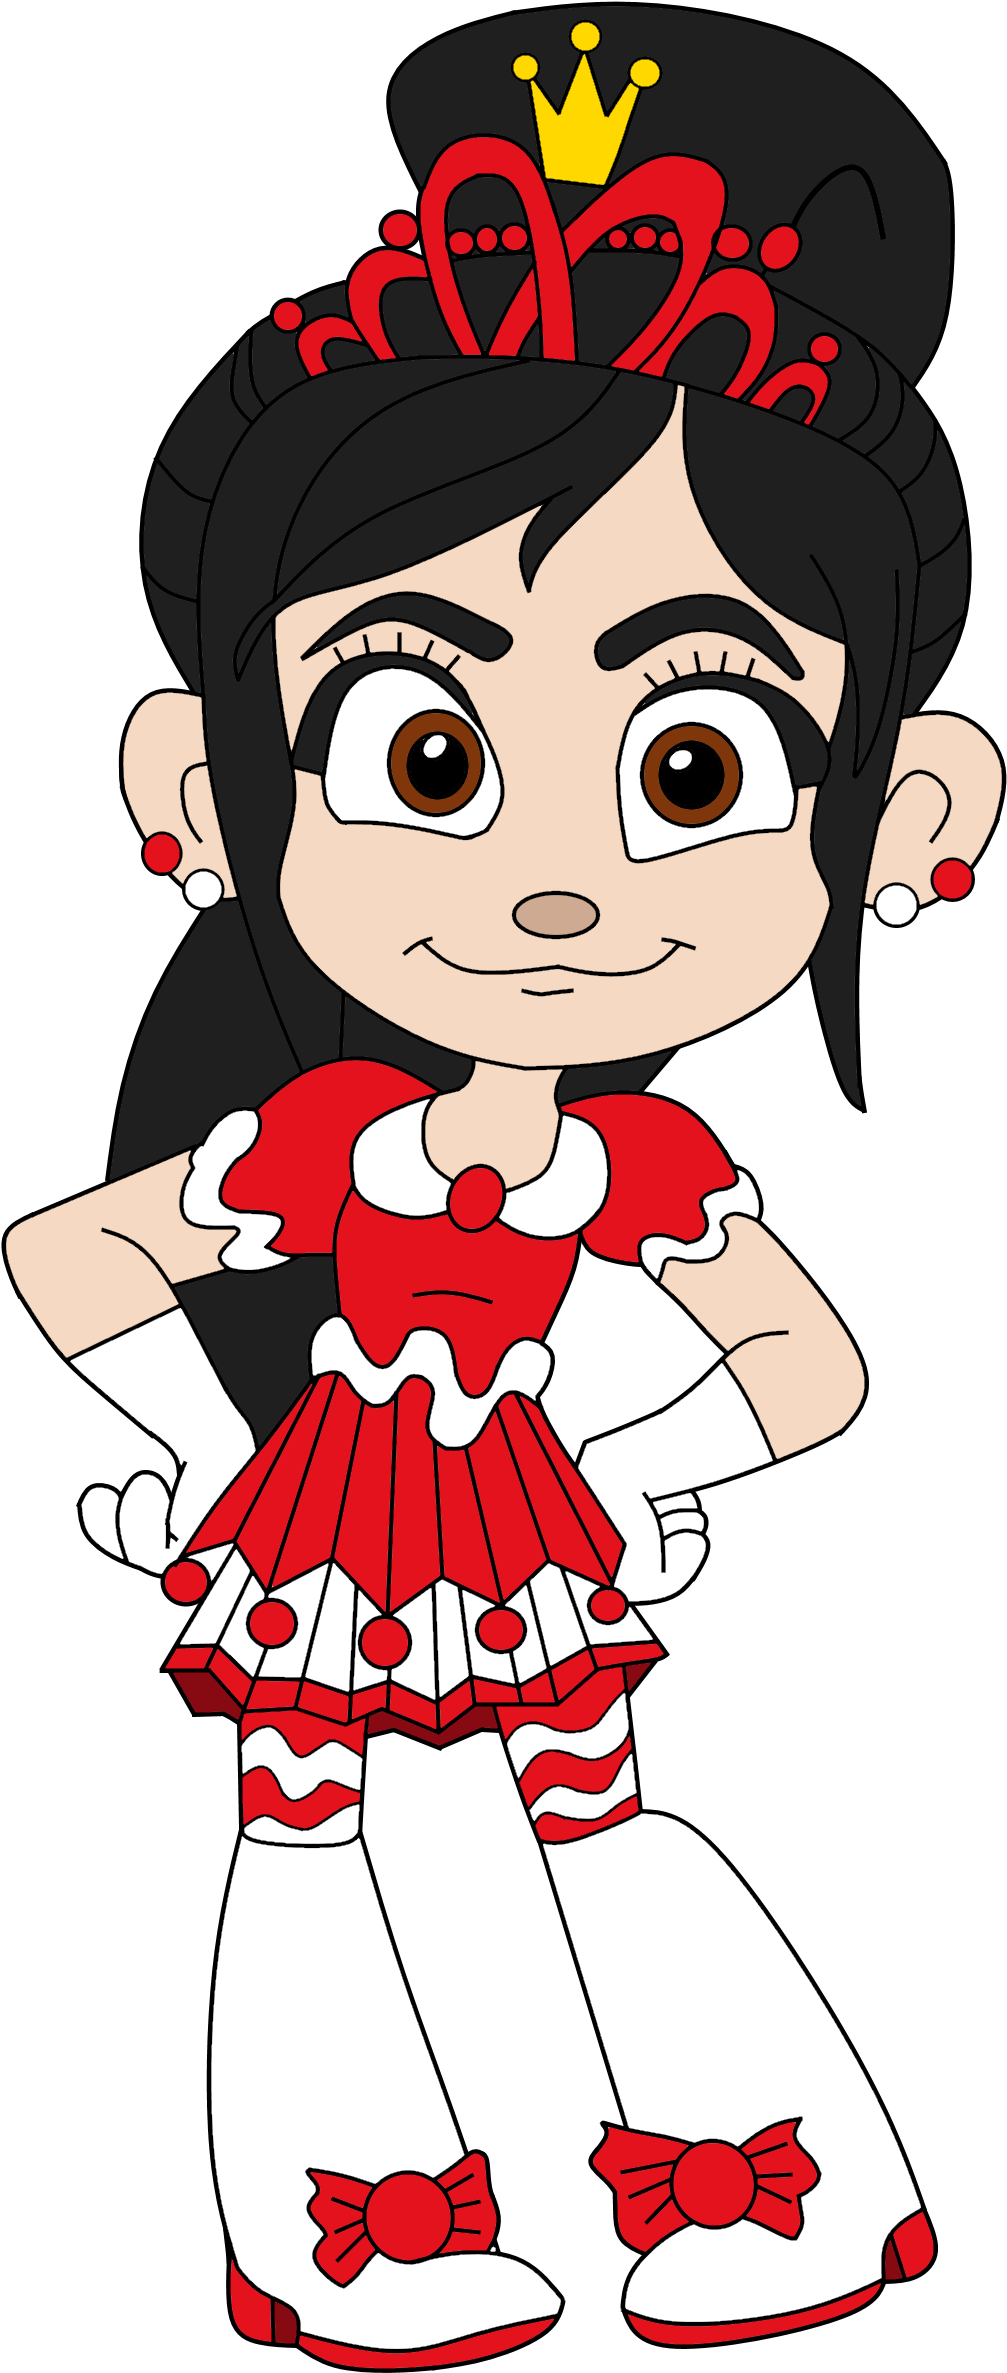 Cartoon Of A Girl In A Red Dress